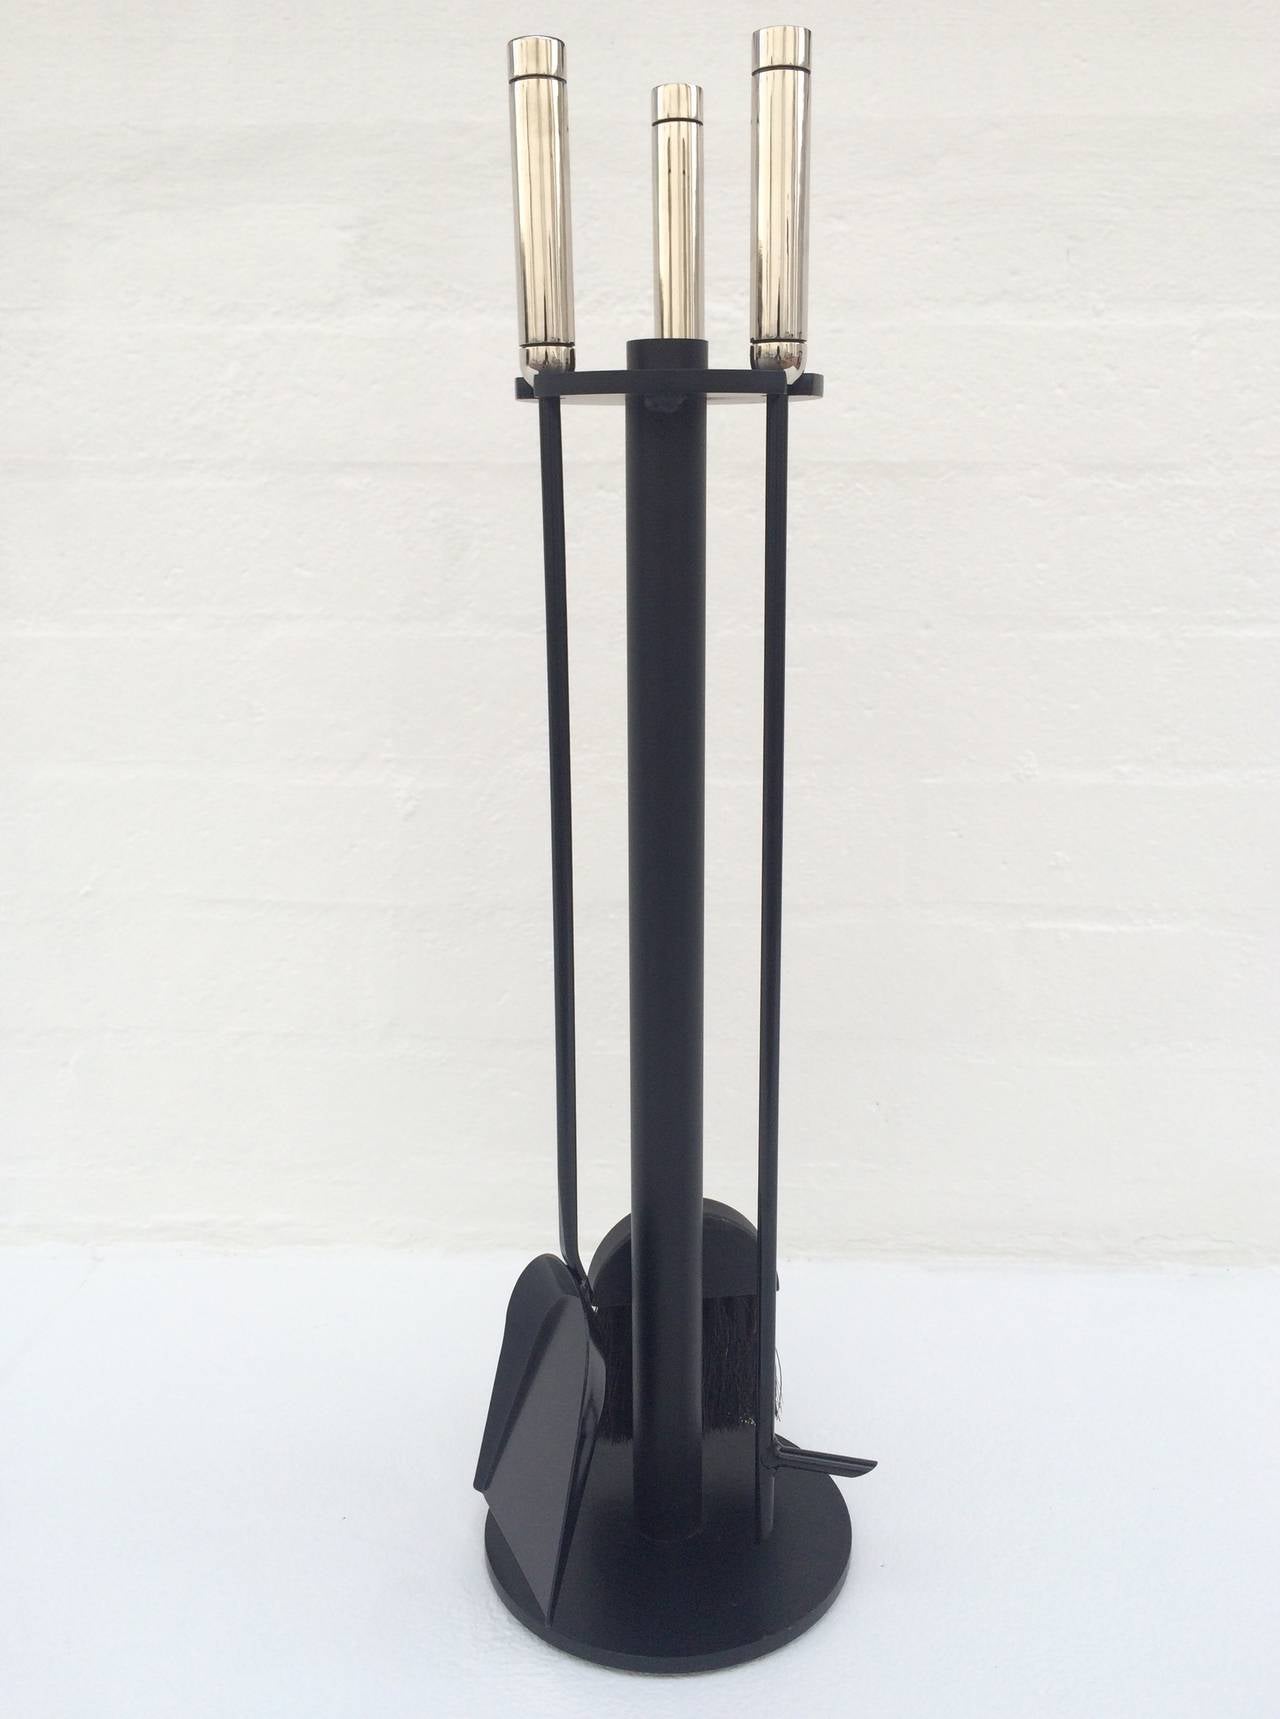 For your consideration a set of fireplace tools. The handles are nickeld plated and the rest is black enameled metal.